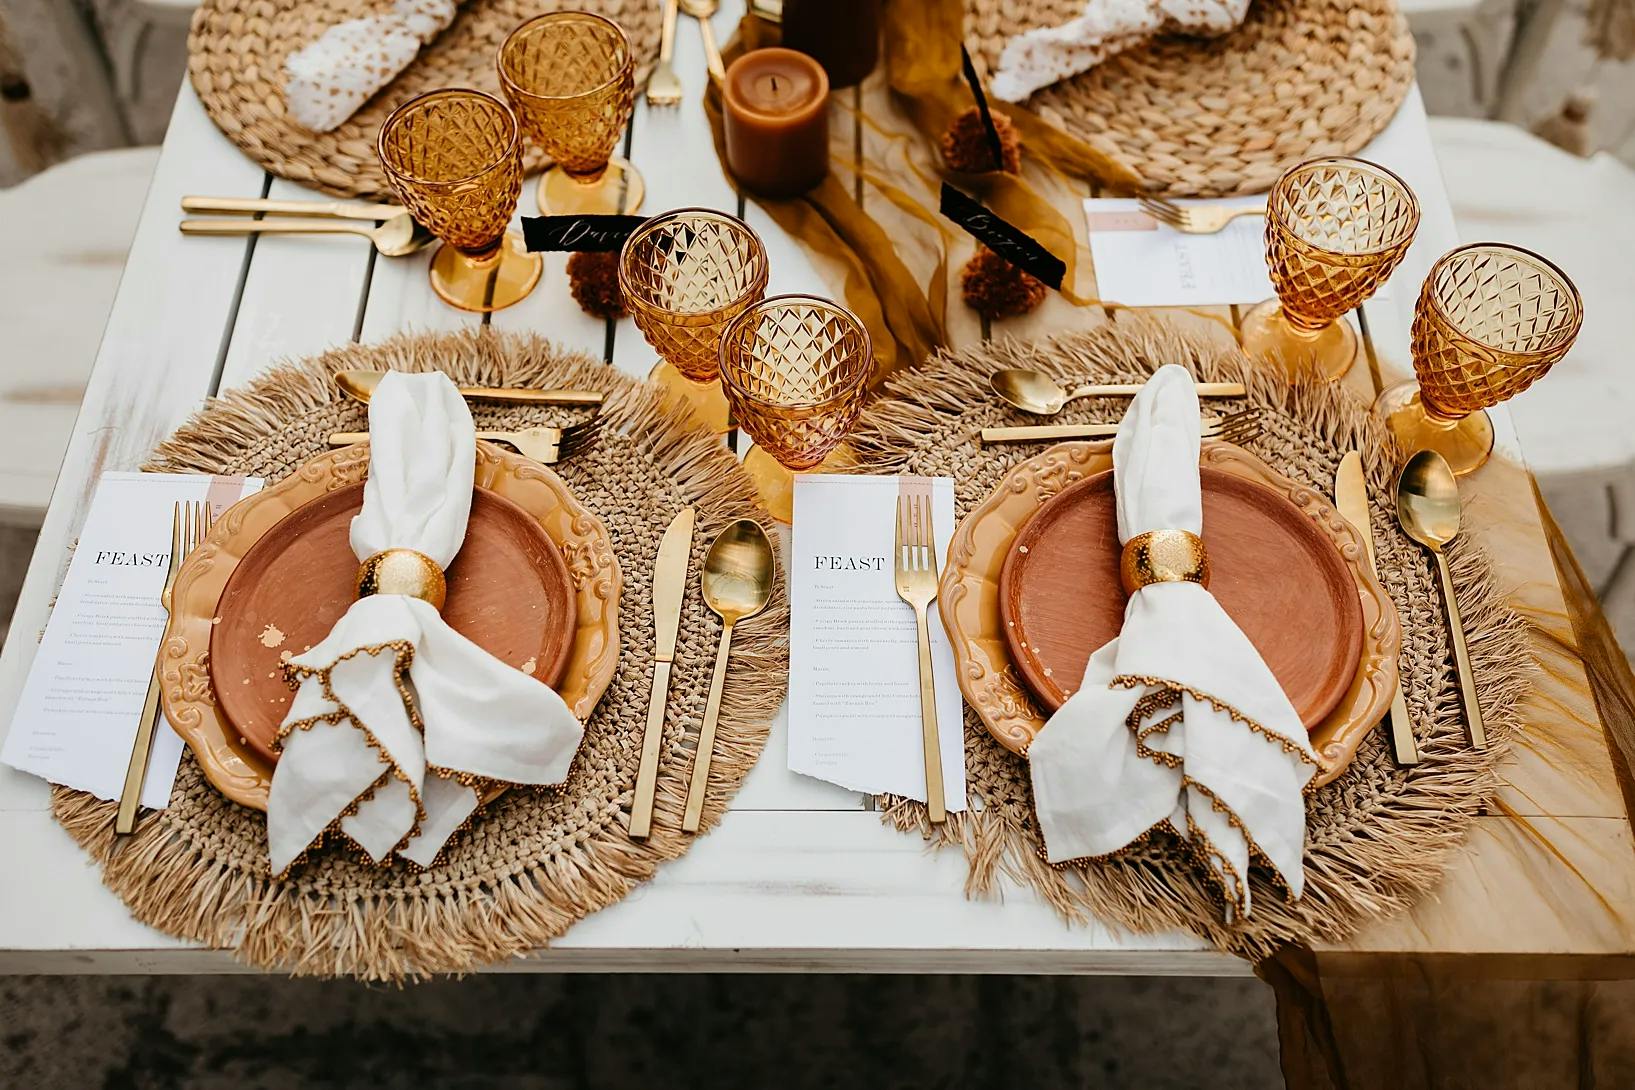 A stylishly set table for two, featuring woven placemats, terra-cotta plates, gold utensils, amber glasses, and white napkins with gold napkin rings. There are menus labeled "FEAST" and a small candle in the center, enhancing the elegant dining setup.